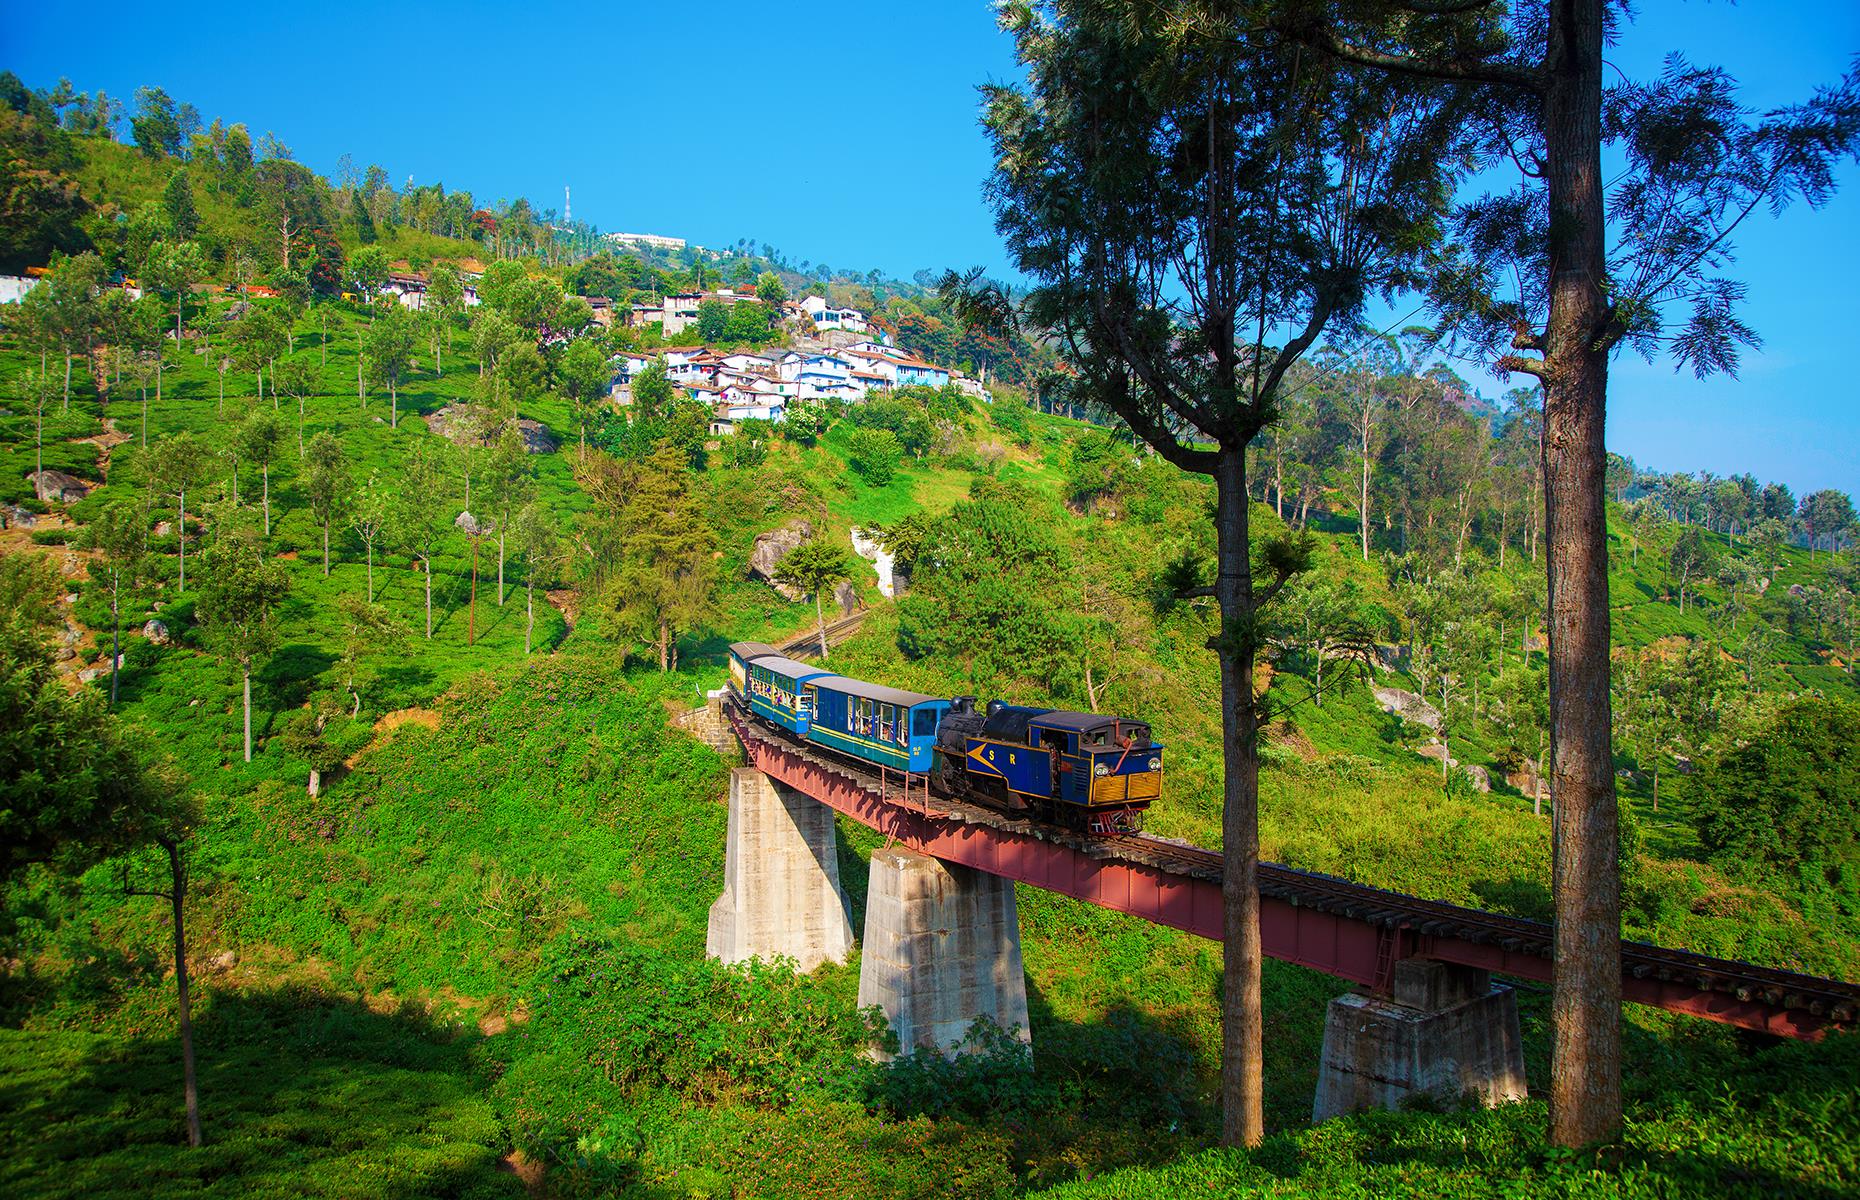 <p>India's only rack railway, the Nilgiri Mountain Railway from Mettupalayam to Udagamandalam is part of the UNESCO-listed Mountain Railways of India but a one-way ride on it won't cost more than $1.05. The train climbs the mountain rather sharply – it has the steepest track in Asia with a maximum gradient of 8.33%. The route takes exactly 290 minutes to go uphill, yet the return journey is 75 minutes shorter.</p>